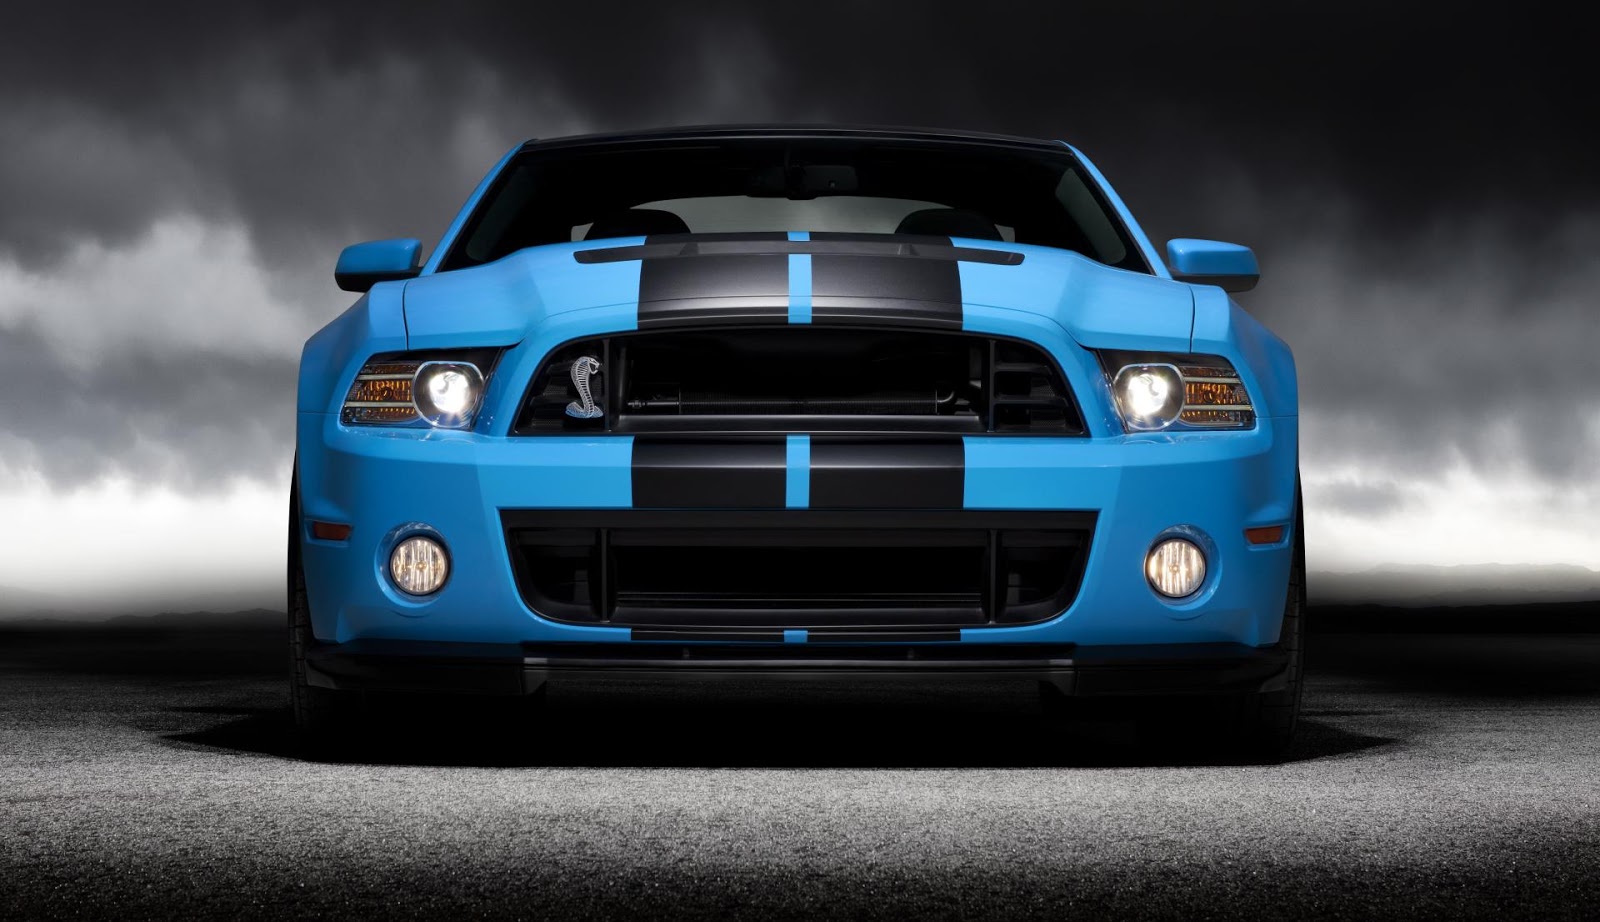 Ford Shelby Mustang Gt500 Hottest Car Wallpaper Bestgarage